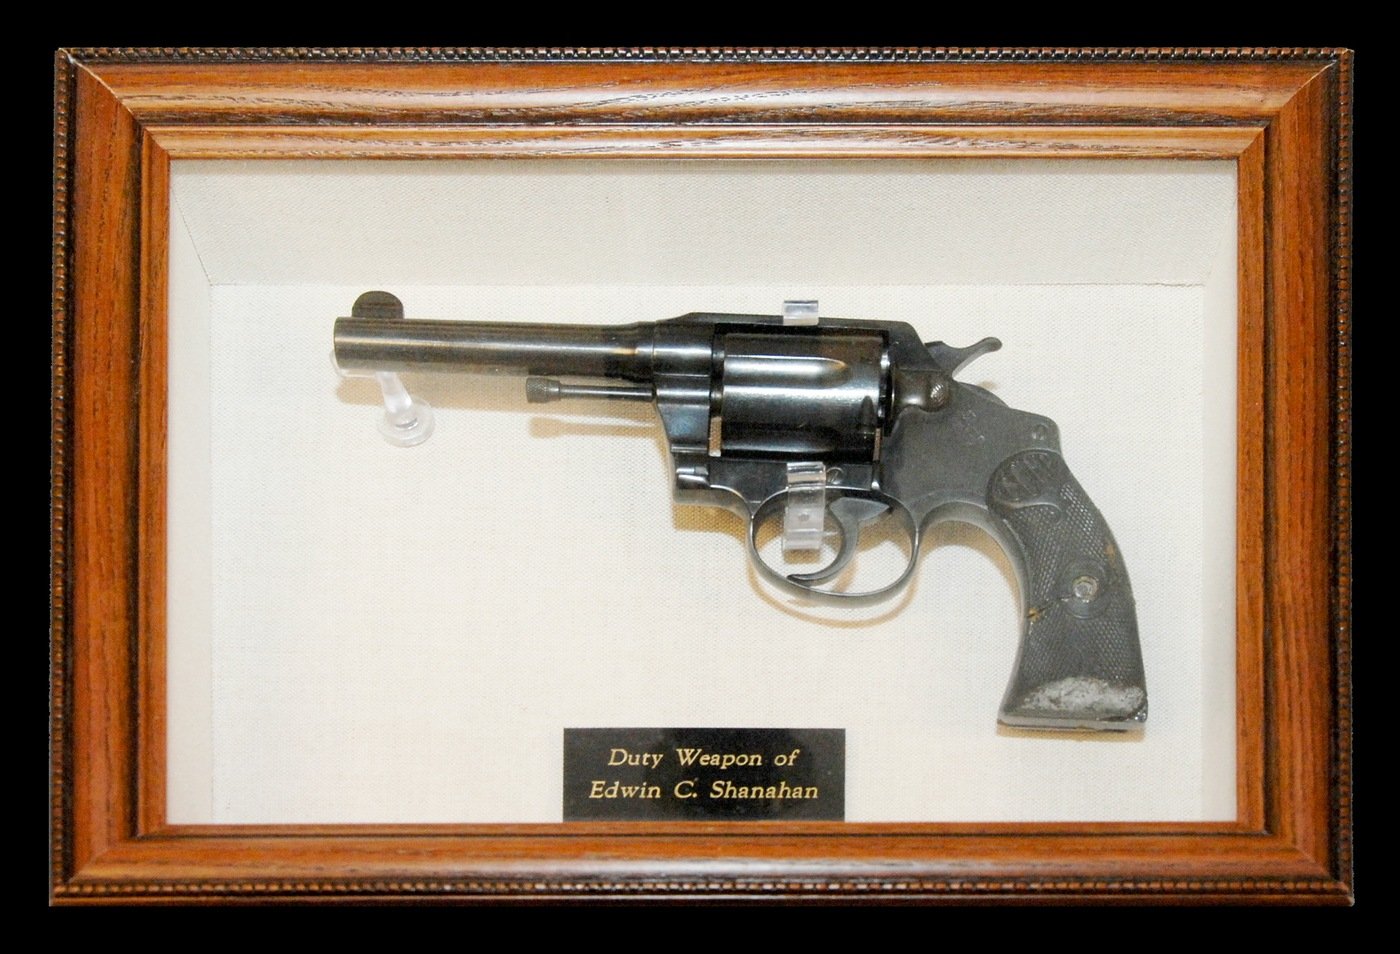 Photo of a gun in a frame. The gun belonged to Special Agent Edwin C. Shanahan, who was killed in the line of duty in 1925.